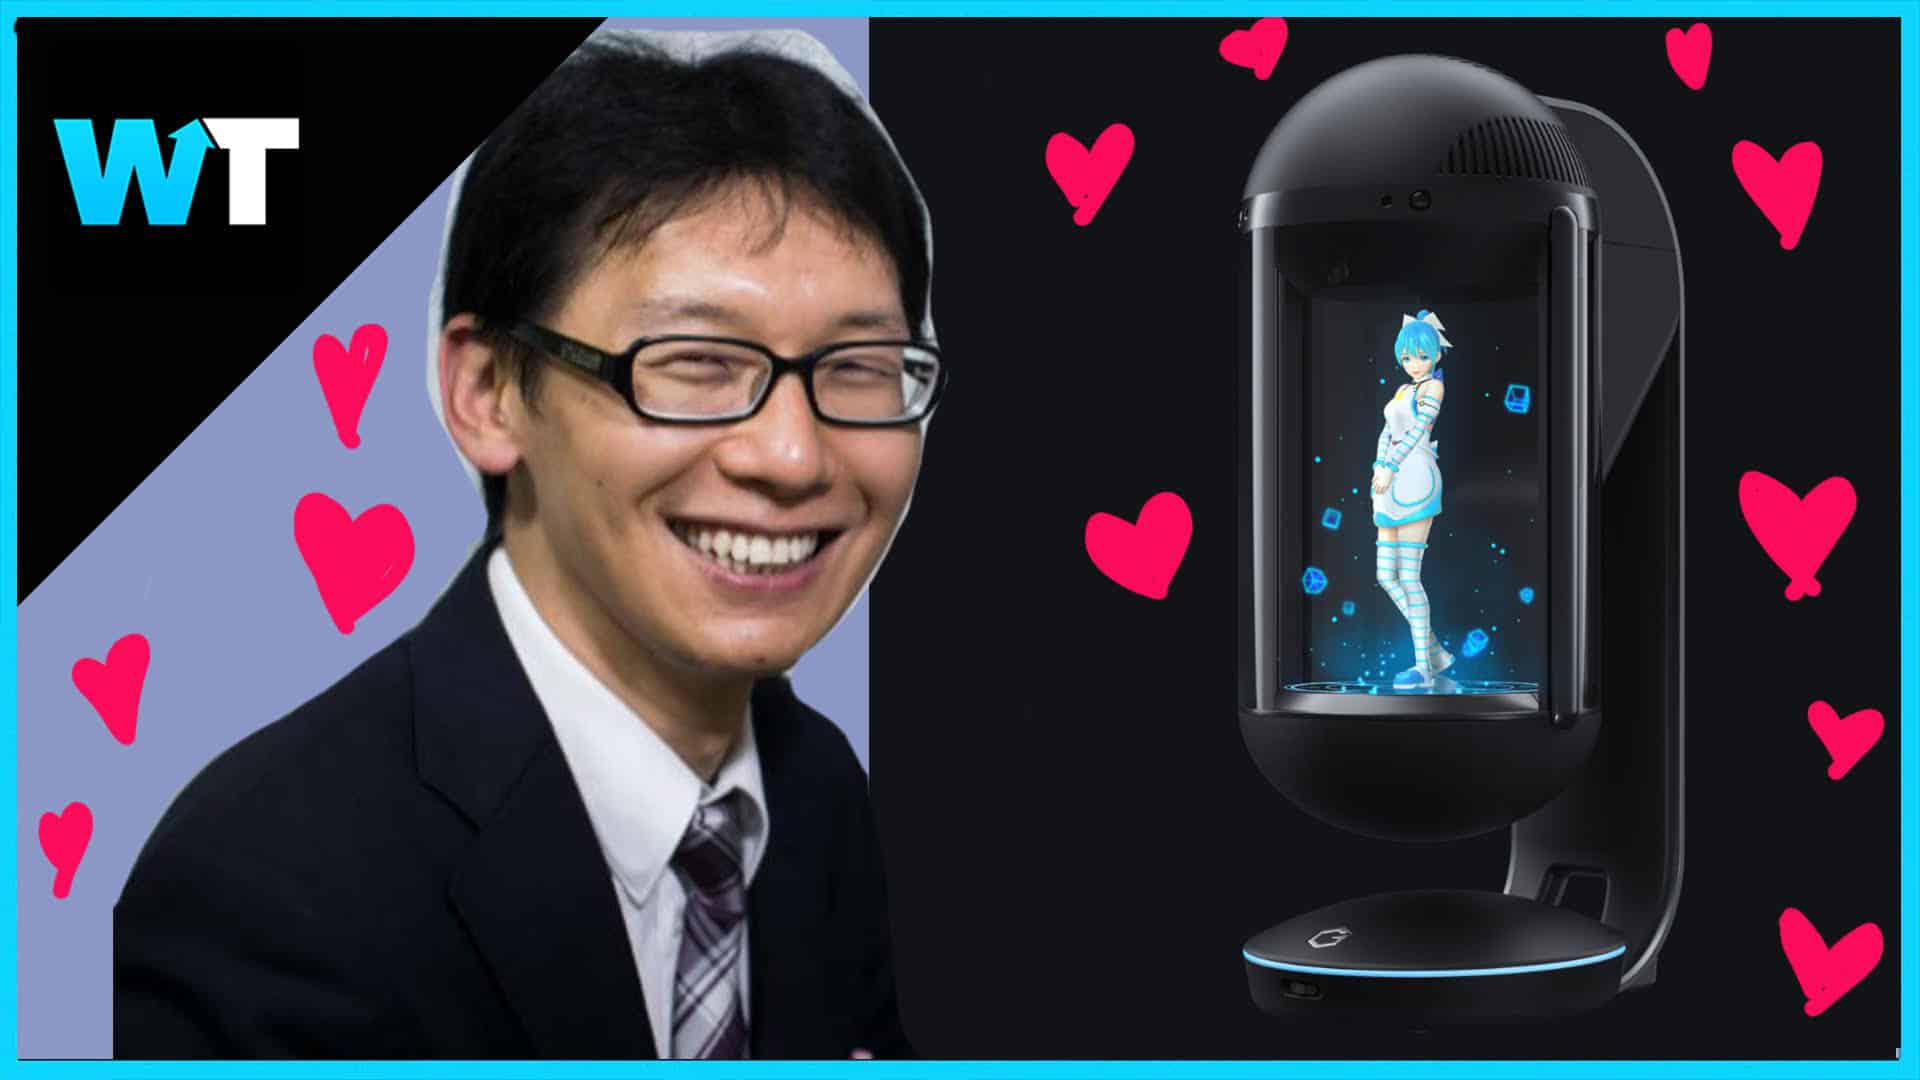 VIDEO: This Man Married a HOLOGRAM?! | What's Trending1920 x 1080